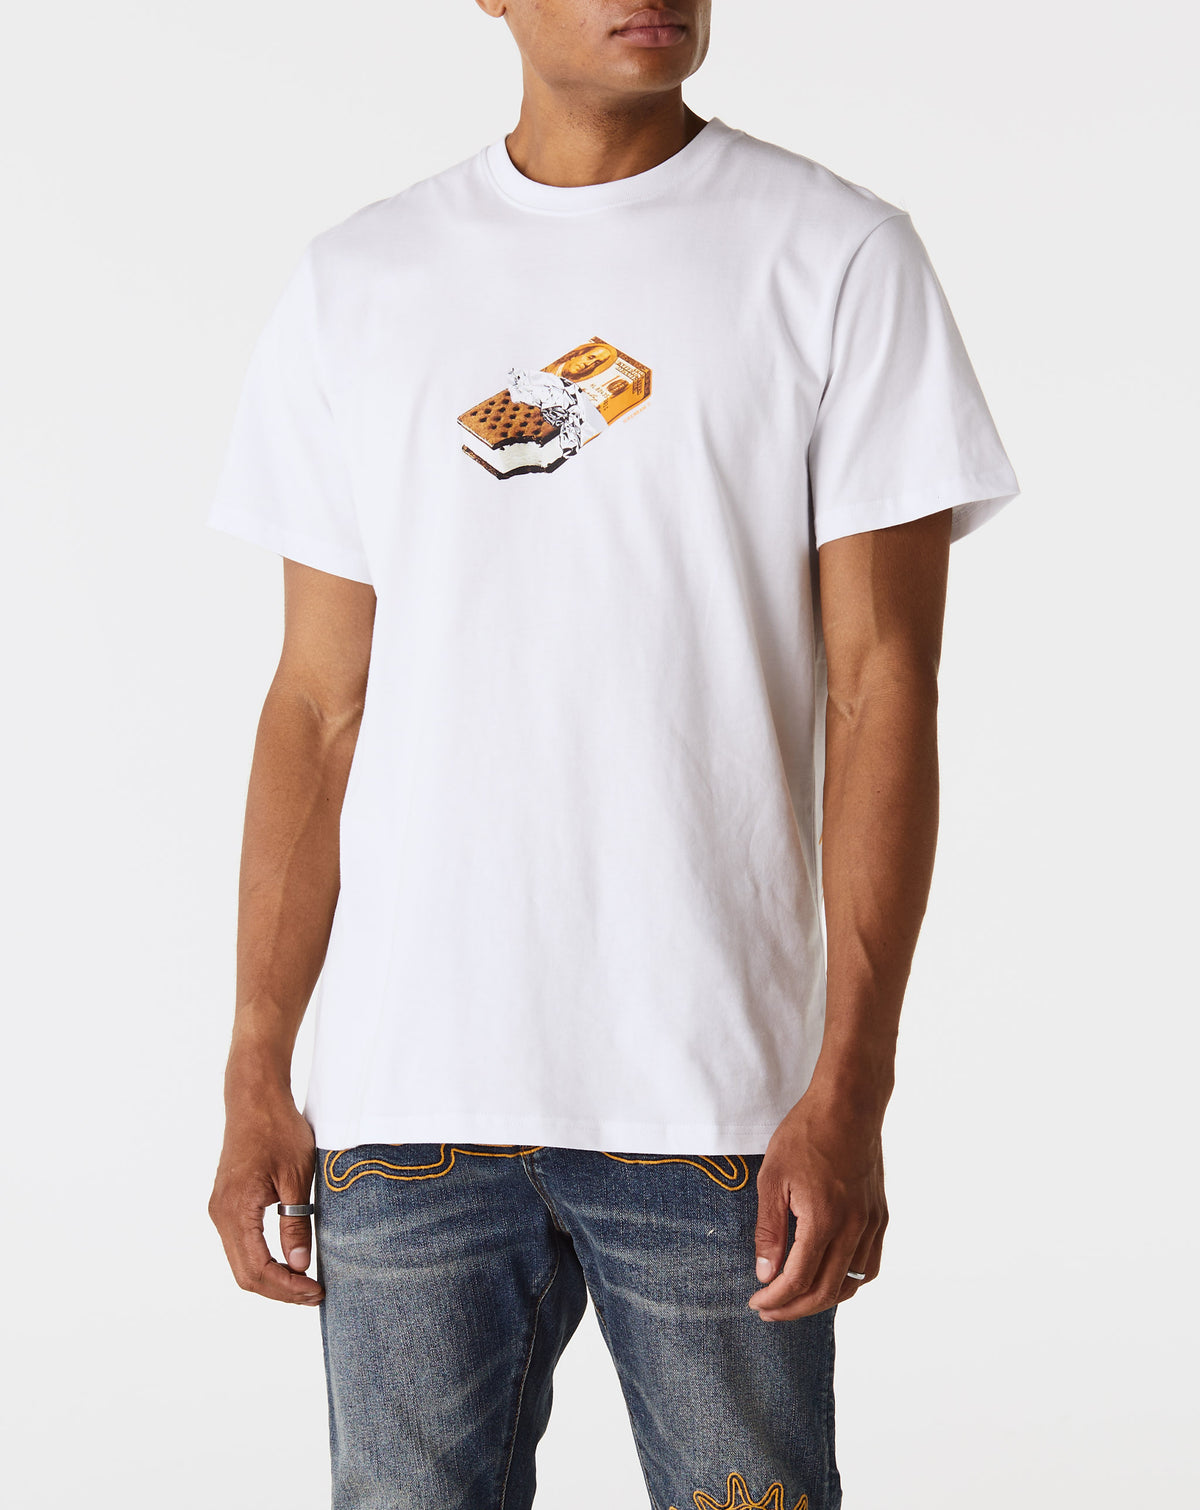 IceCream One Hundred T-Shirt - Rule of Next Apparel